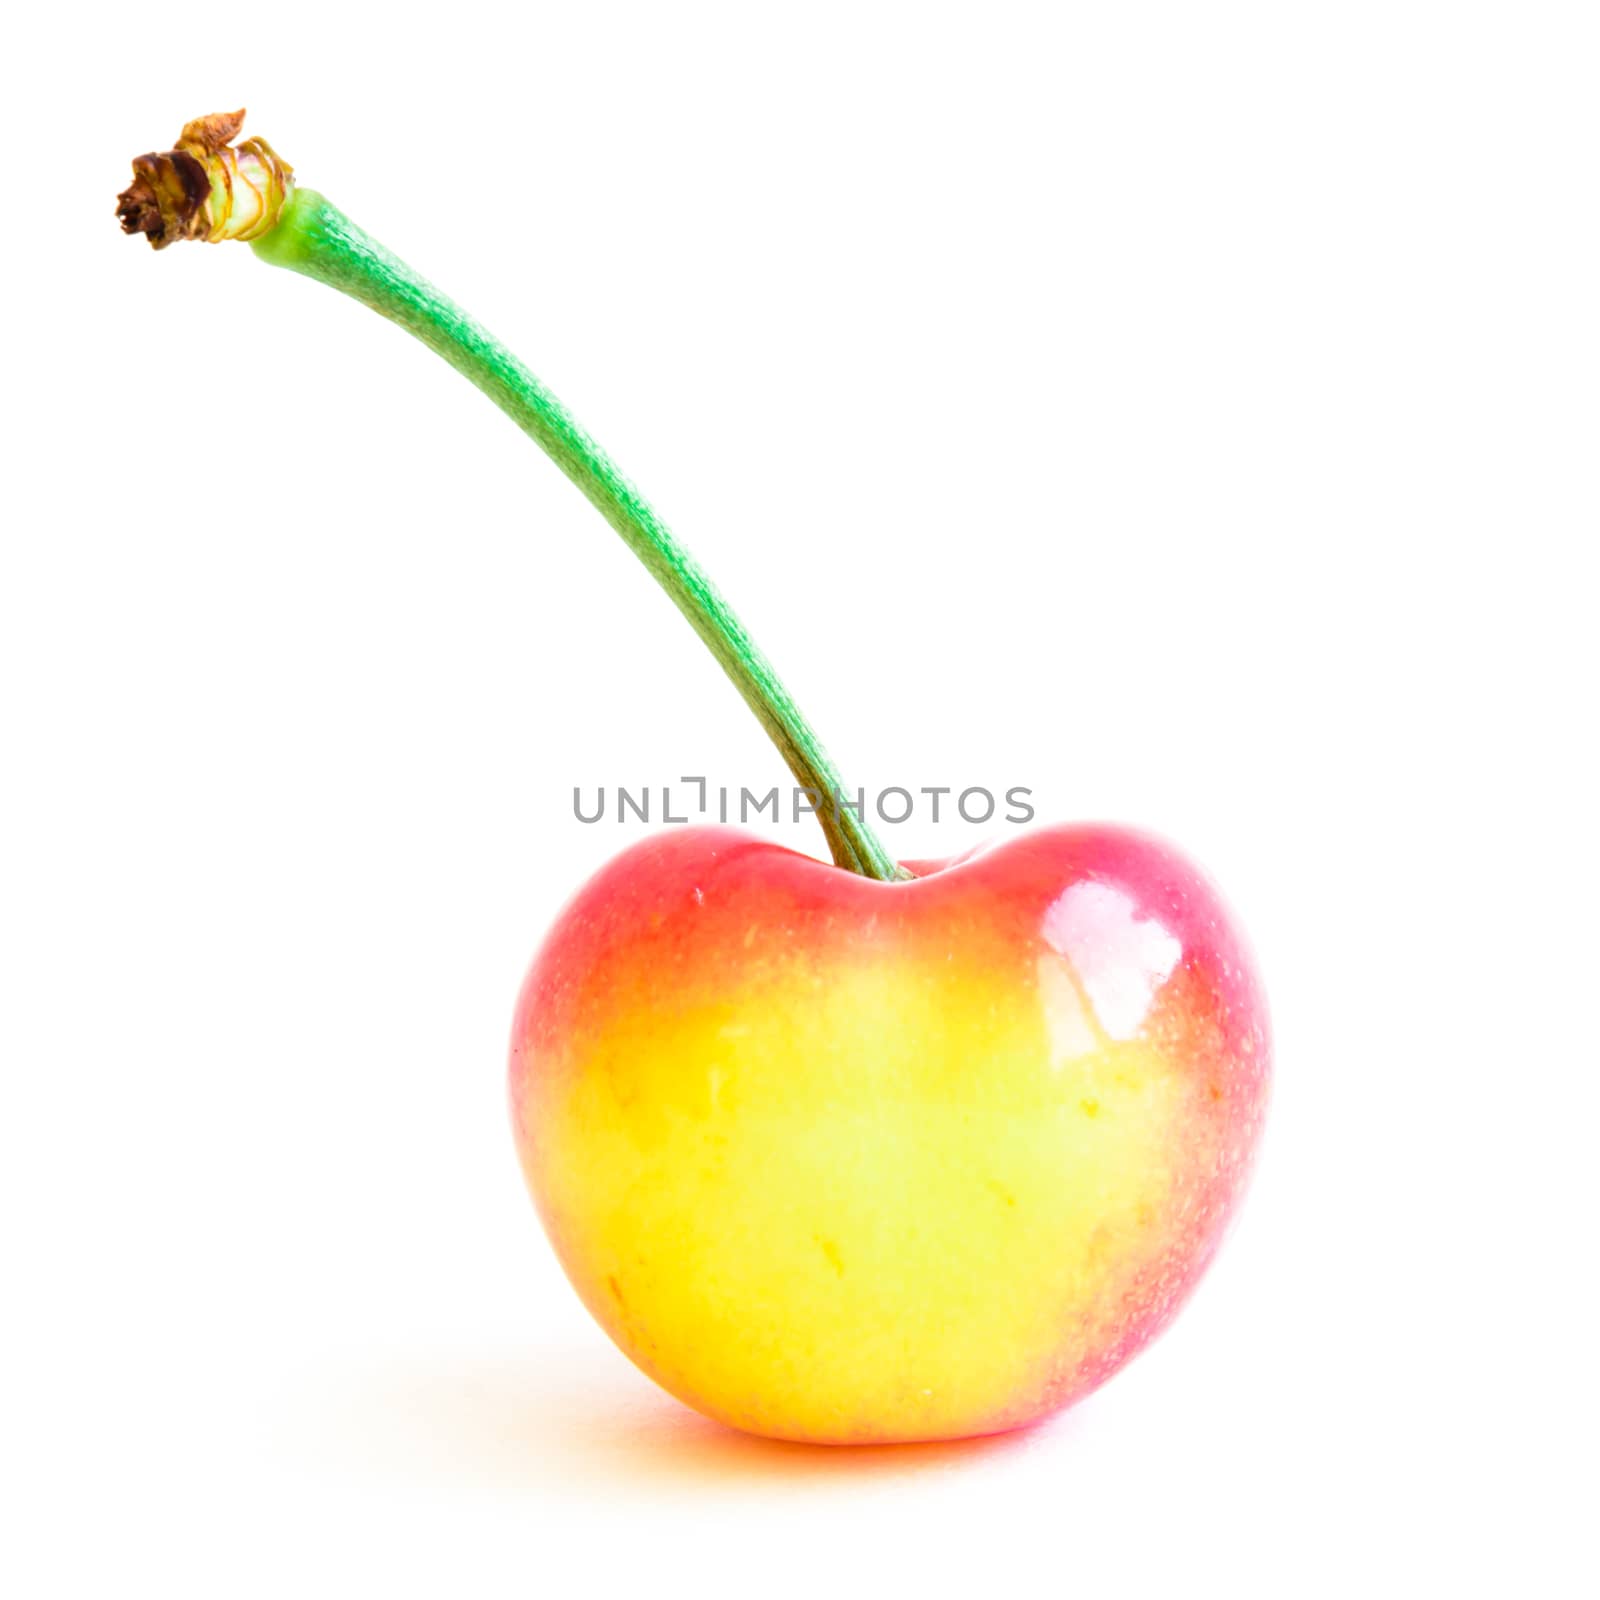 Single Rainier cherry isolated on white background. They are grown in Yakima Valley, a prime agricultural area of Washington State and the largest variety of crops in the Pacific Northwest, US